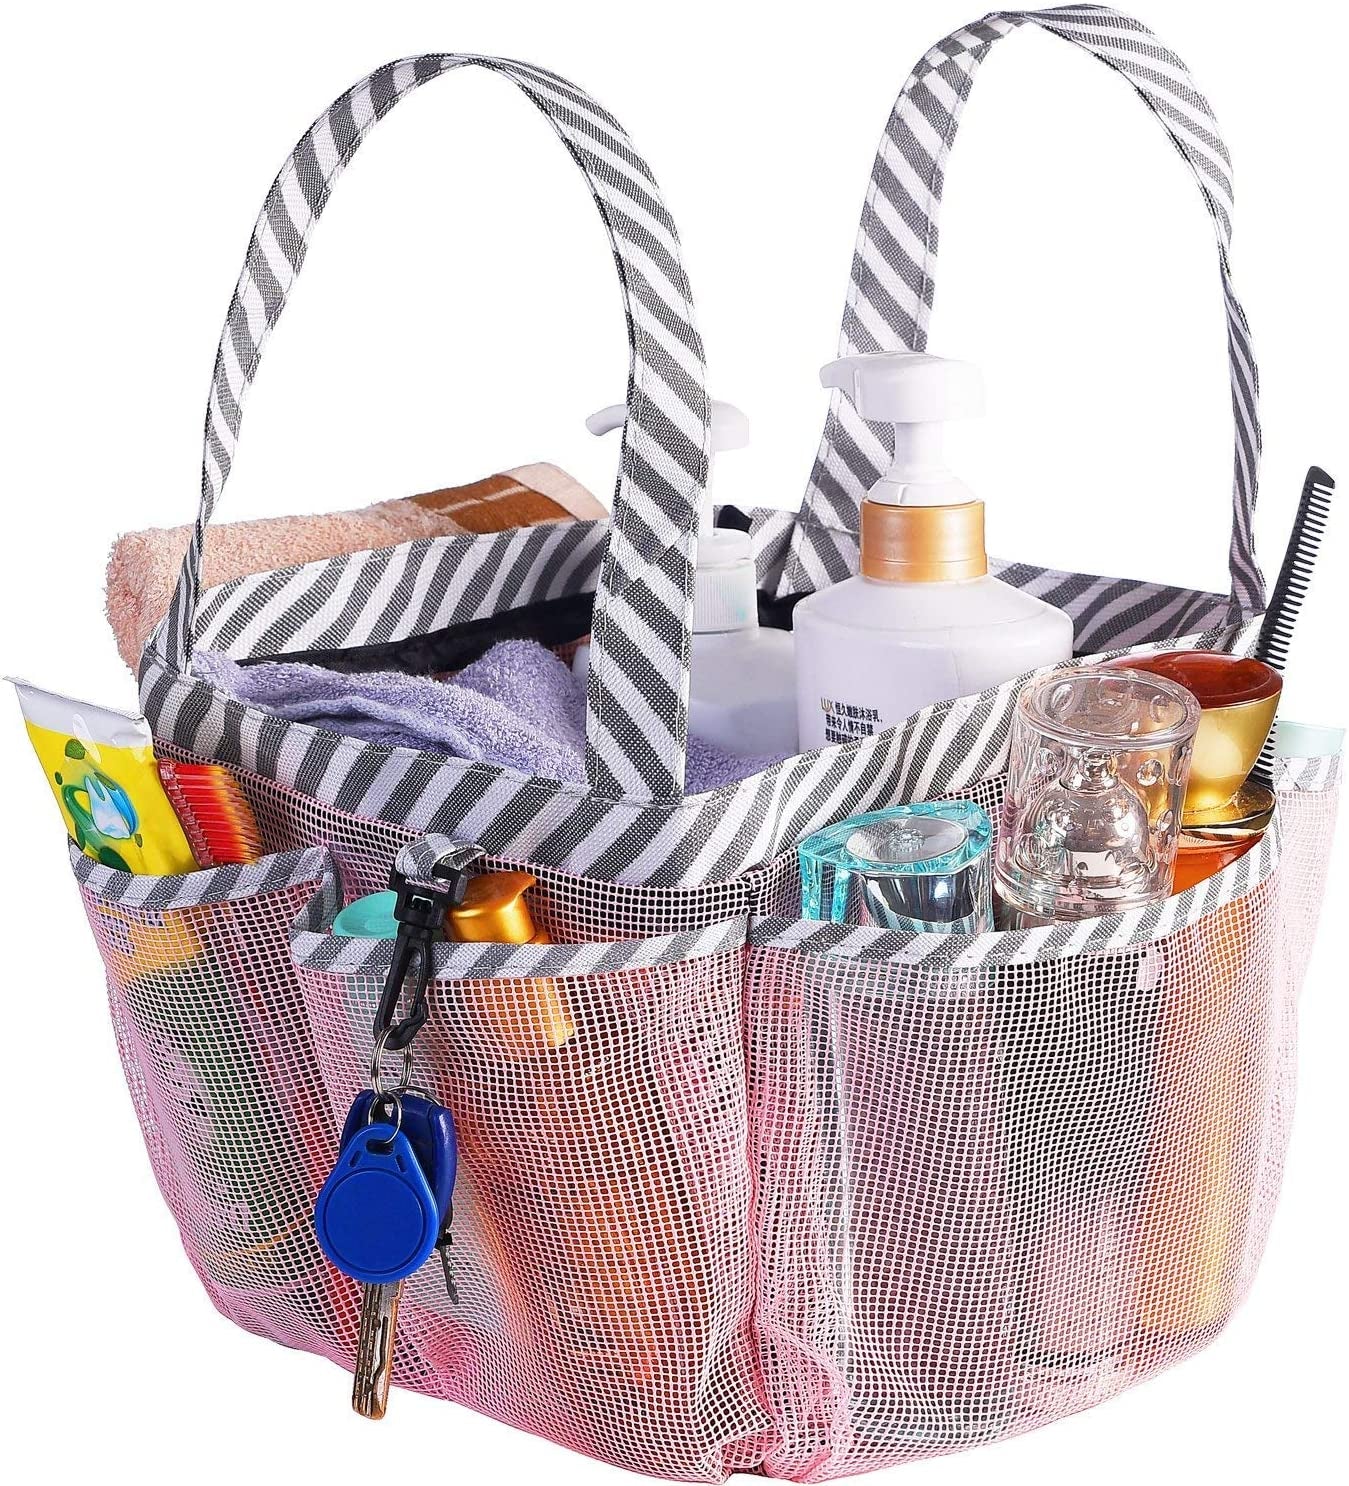 Haundry Portable Mesh Shower Caddy, 8 Basket Tote for Bathroom College Dorm, Large Shower Caddy Bag for Camping Gym